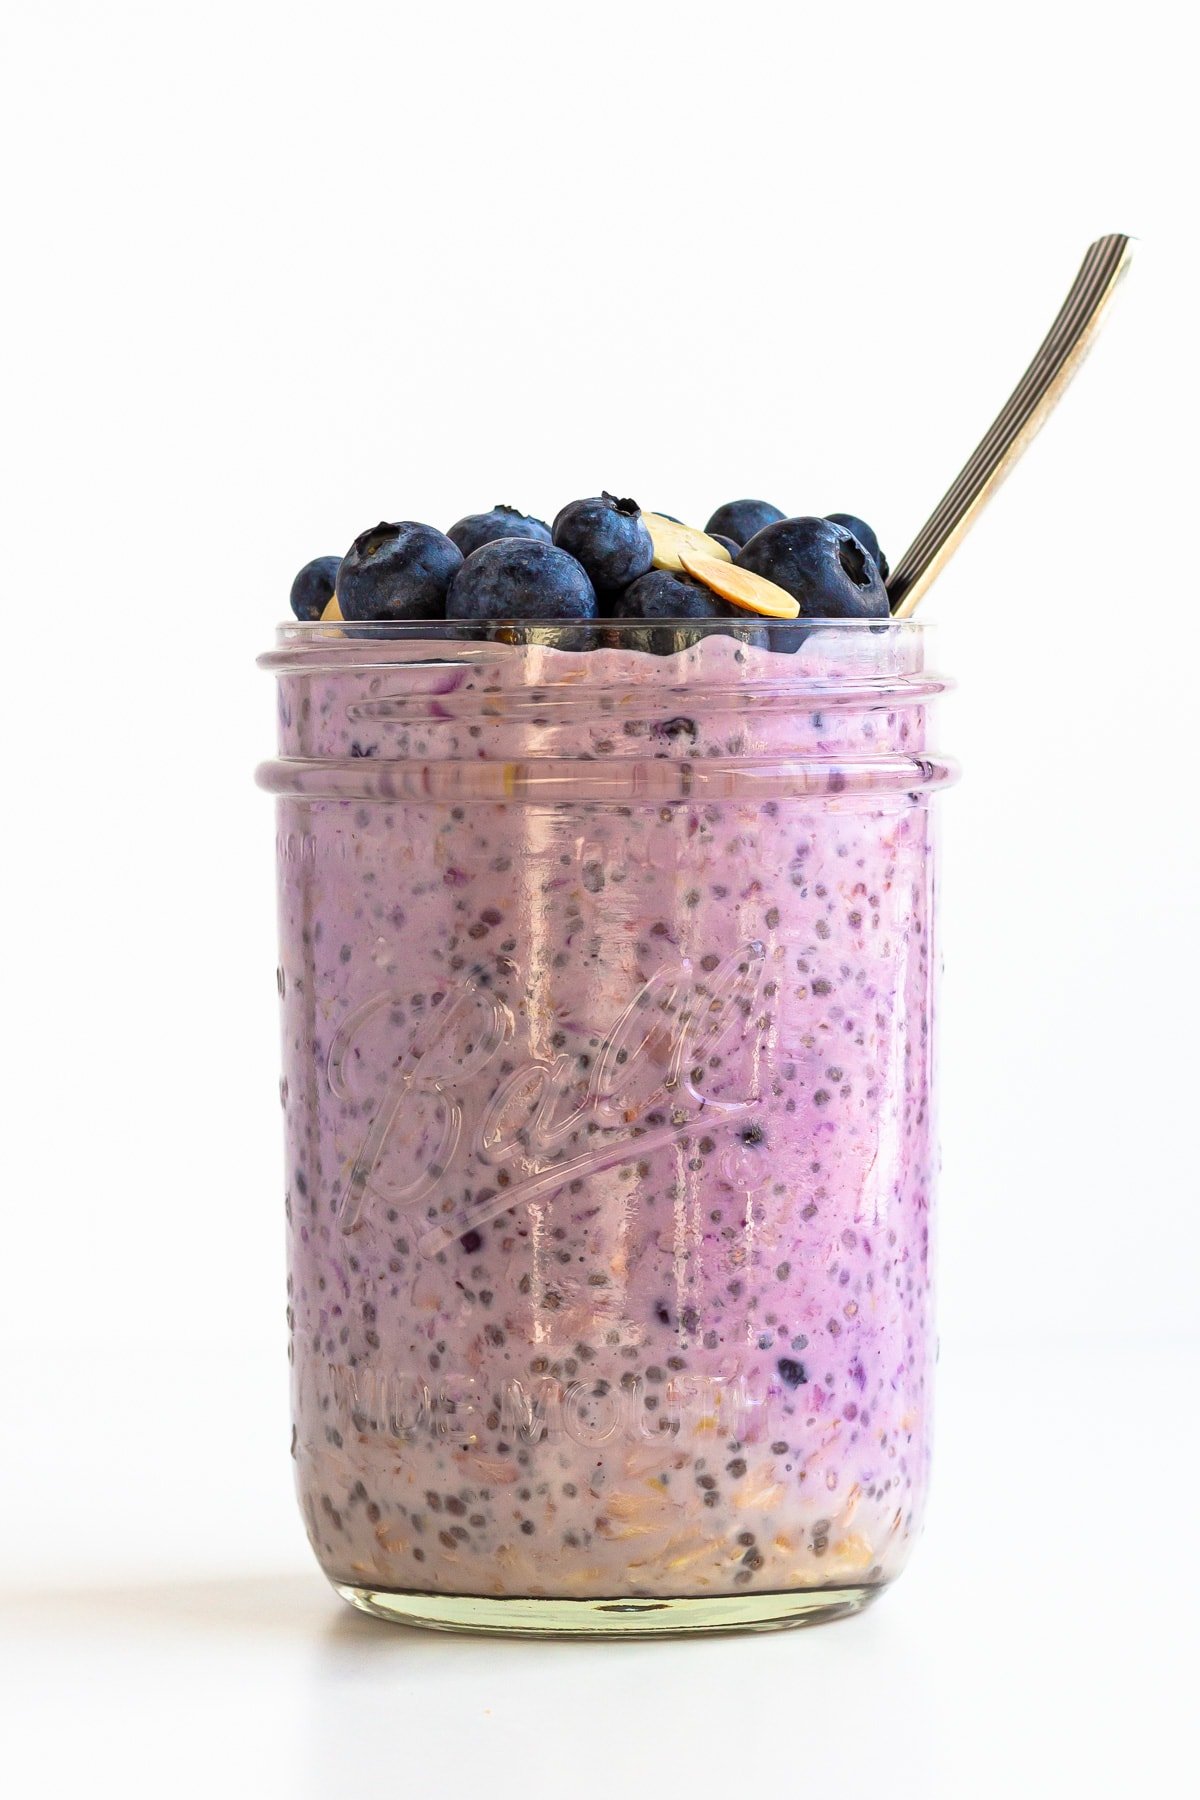 Mason jar of blueberry overnight oats with spoon.